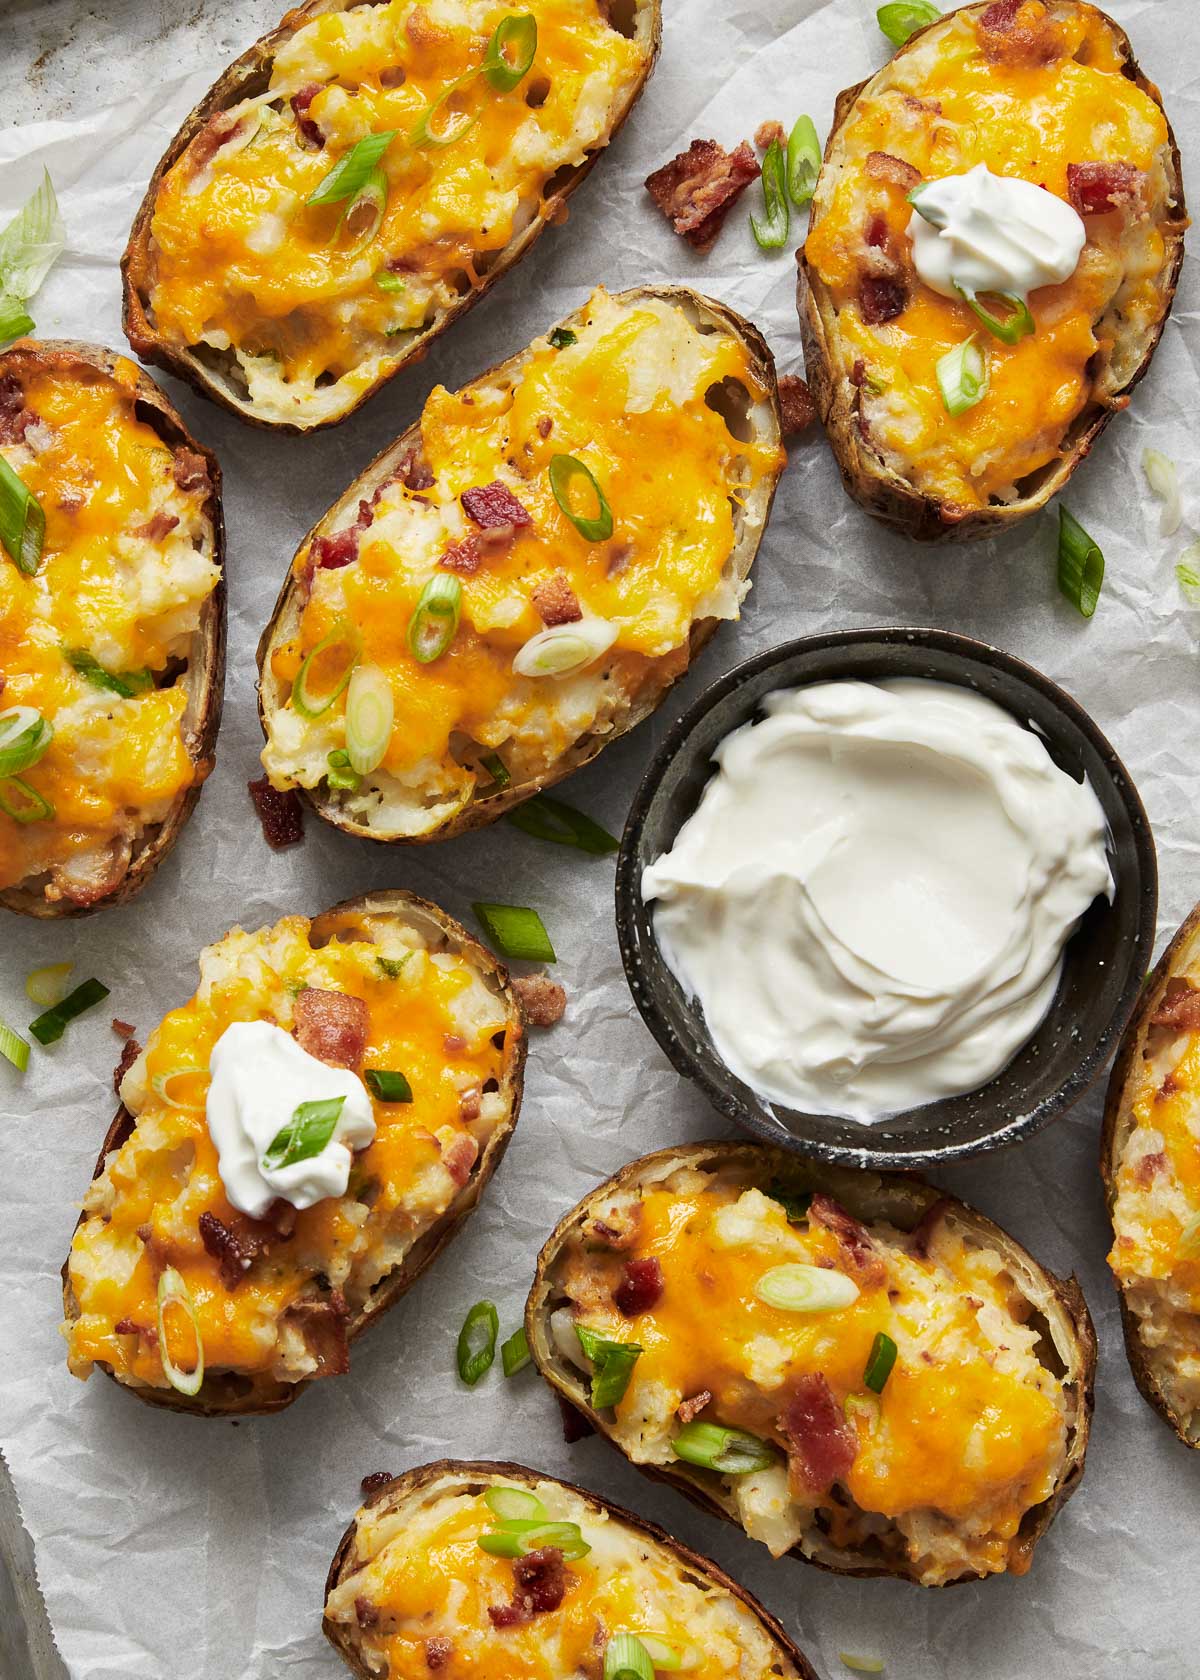 Top view of twice baked potatoes on a white plate with a small bowl of dip next to them.